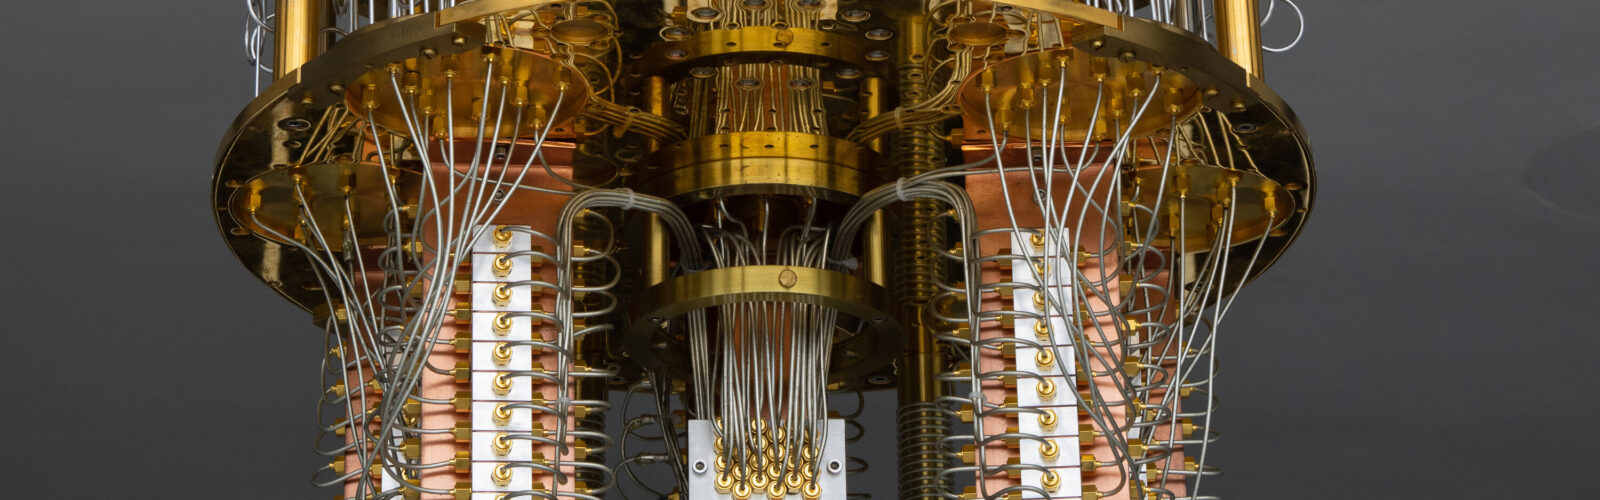 An image of a quantum computer